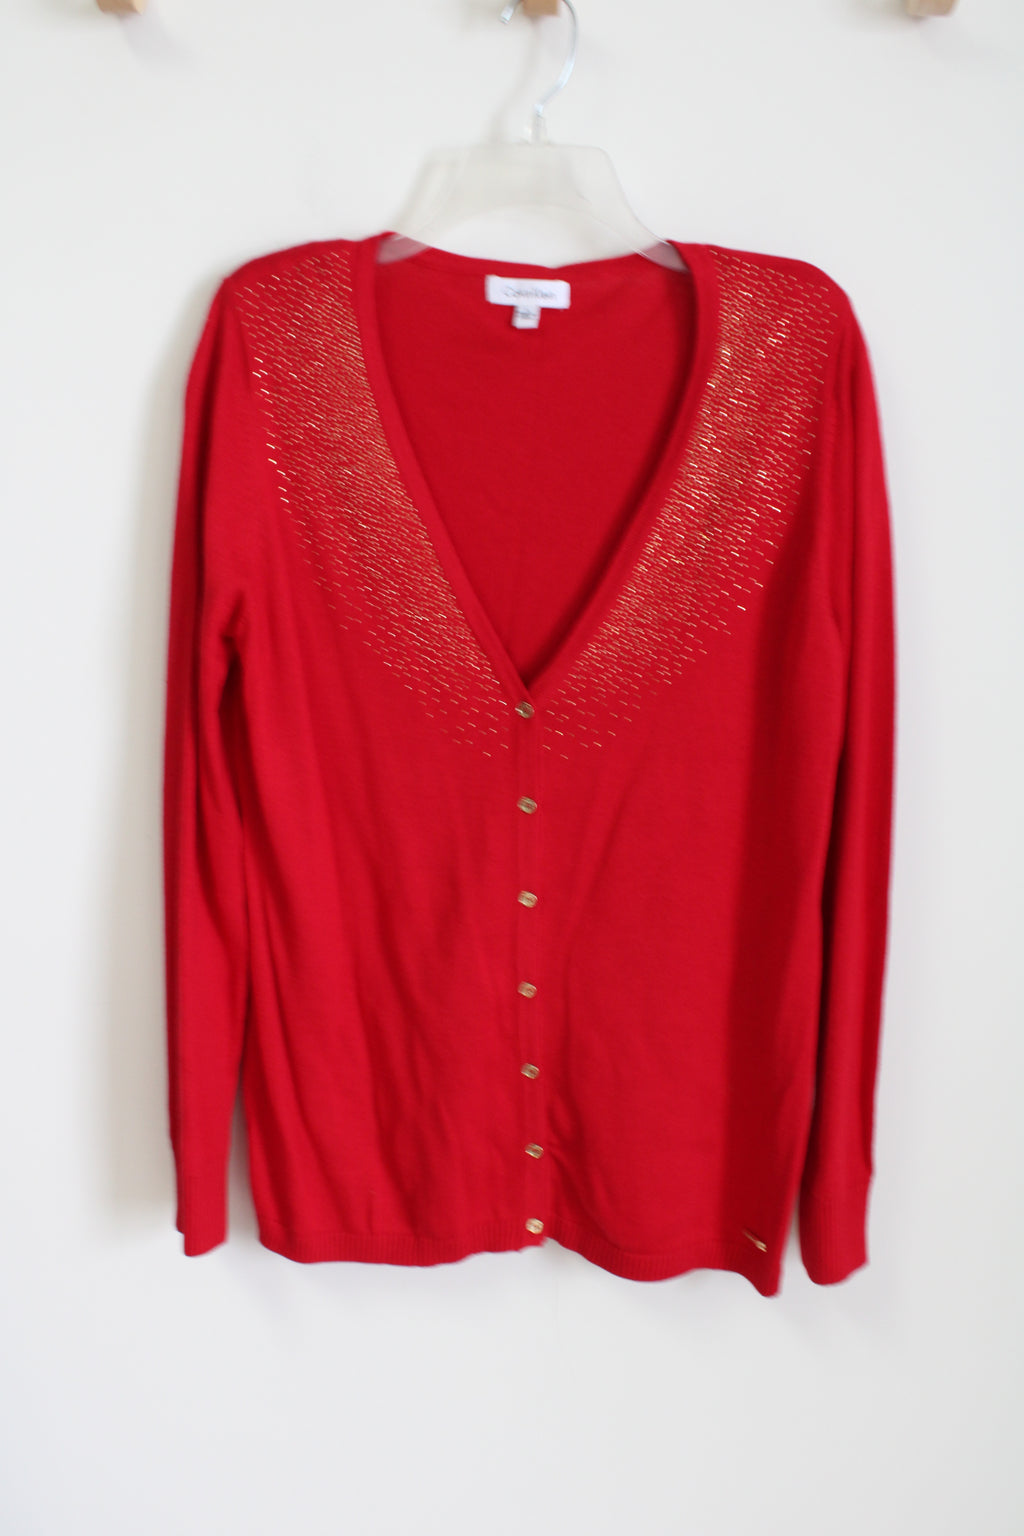 Calvin Klein Red Studded Cardigan | L